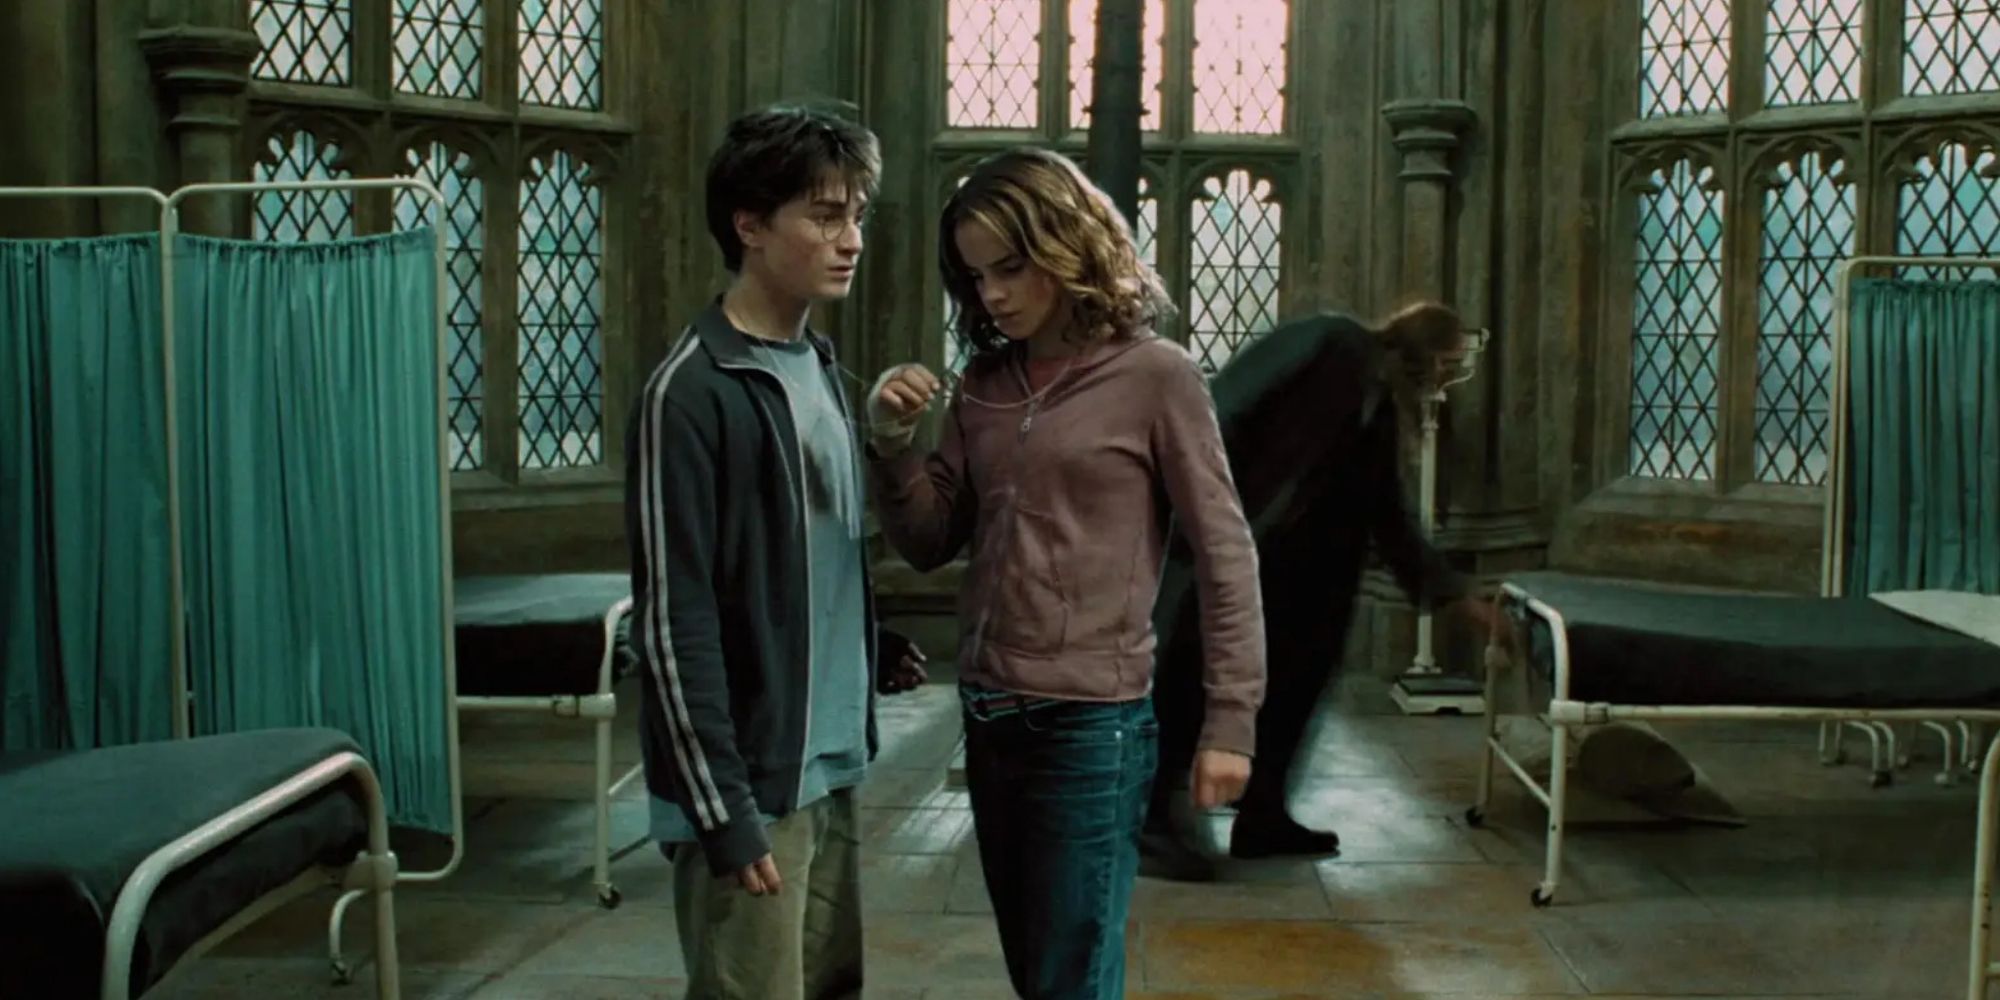 Harry and Hermione use the time turner in 'Harry Potter and the Prisoner of Azkaban'